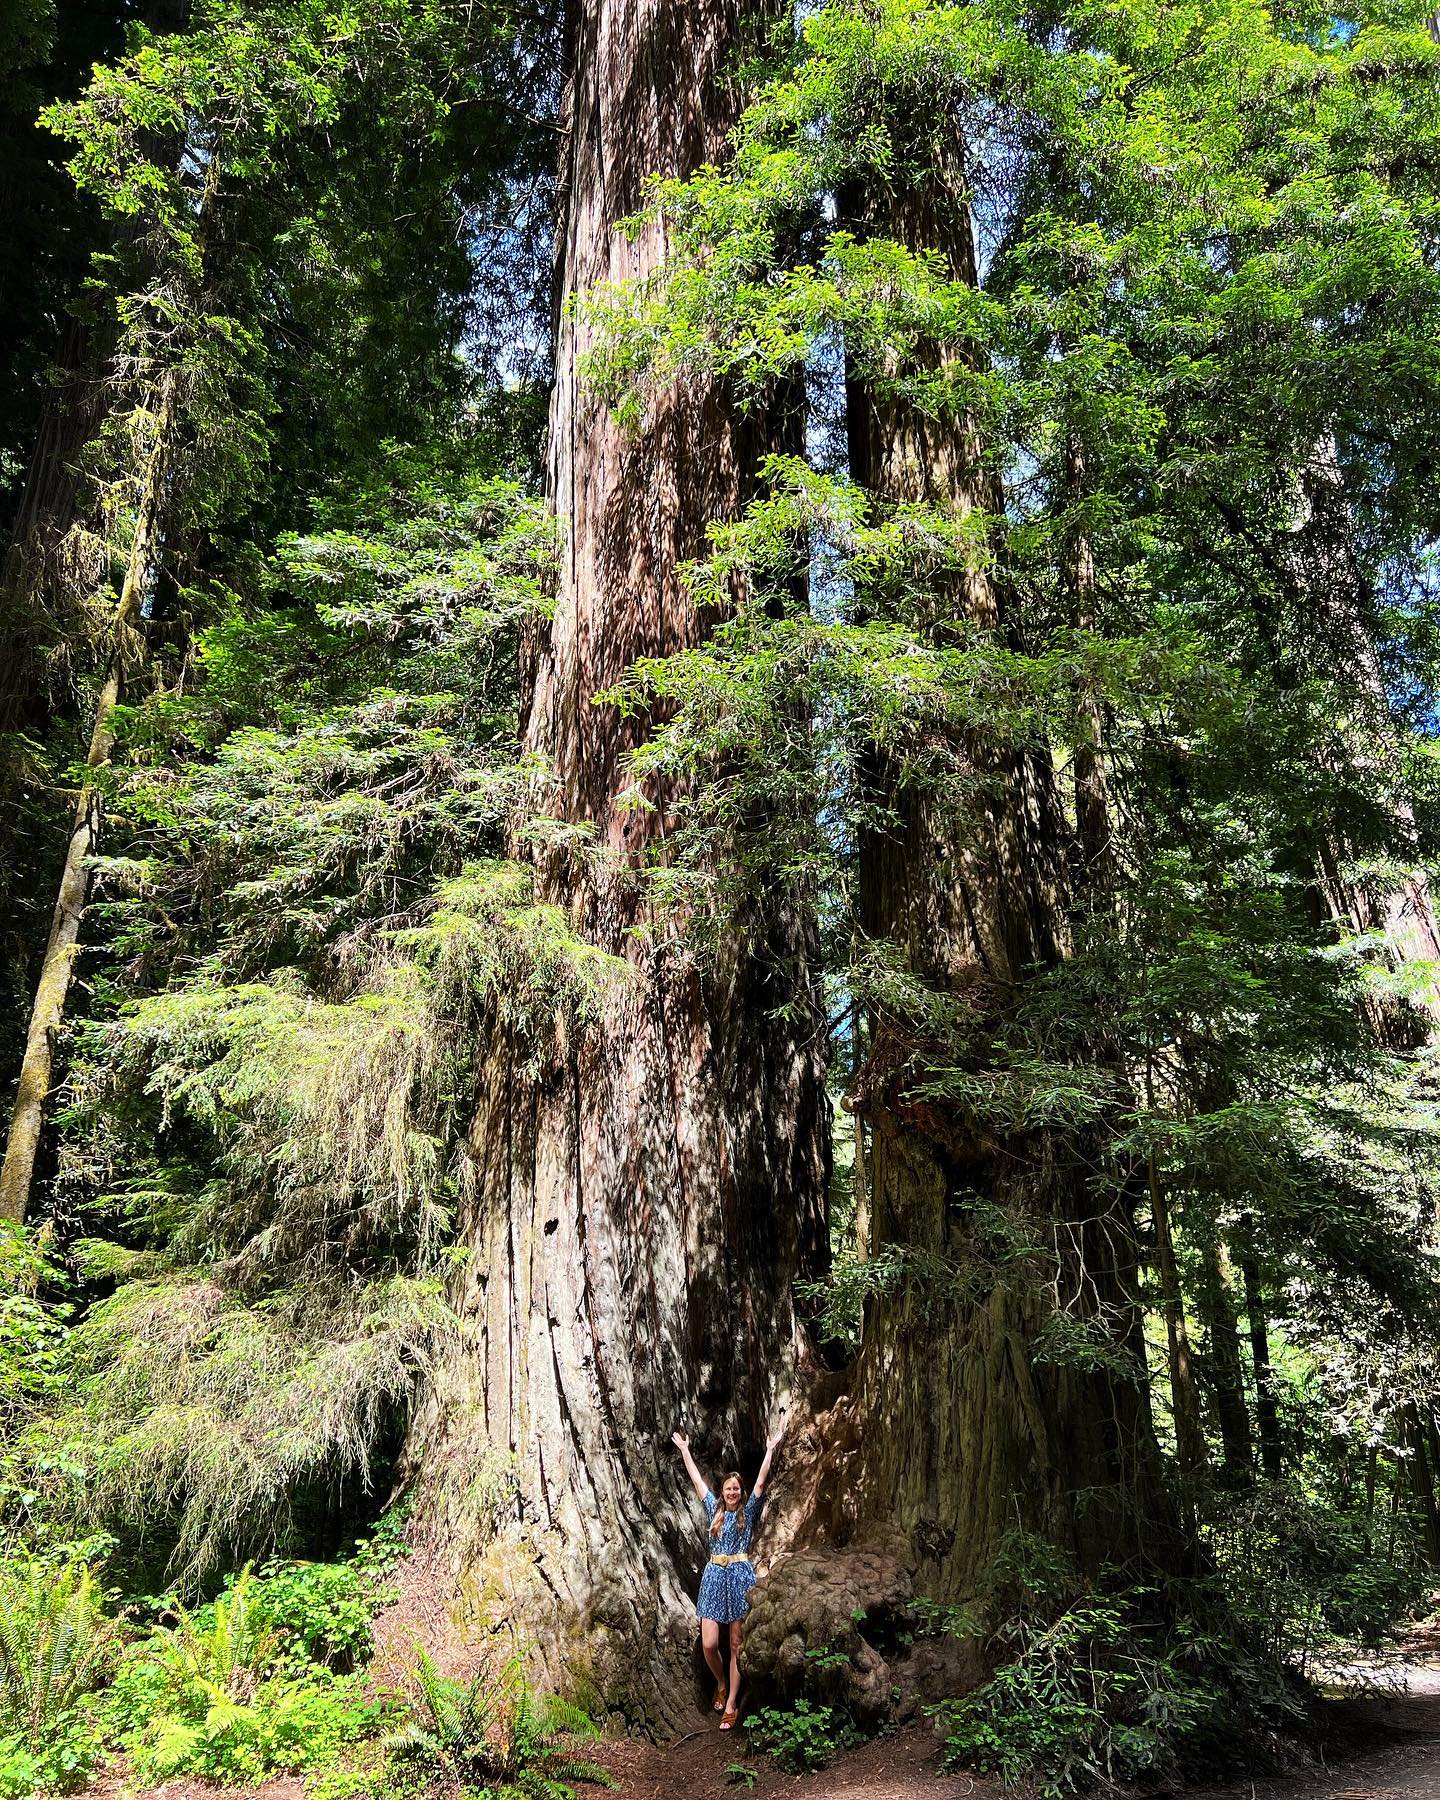 Right at the tippy-top of California lies Jedediah Smith Redwoods State Park where you can wander through a forest of remaining old-growth redwoods. Tall giants that have been around for 500 to 700 years! Honestly pictures don’t do justice but make sure to visit a redwood forest when you’re in California! 🇺🇸 
.
.
#redwoods #oldgrowthforest #forest #california #usa #roadtrip #feelingsmall #jedediahsmithstatepark #statepark #forest #treehugger #naturelovers #protectnature #bekind #sequoia #trees #lushgreen #wandering #woods #oregon #unitedstates #campertrip #camping #tall #giants #reizen #rondreis #reisfotografie #reisblogger #reistypje